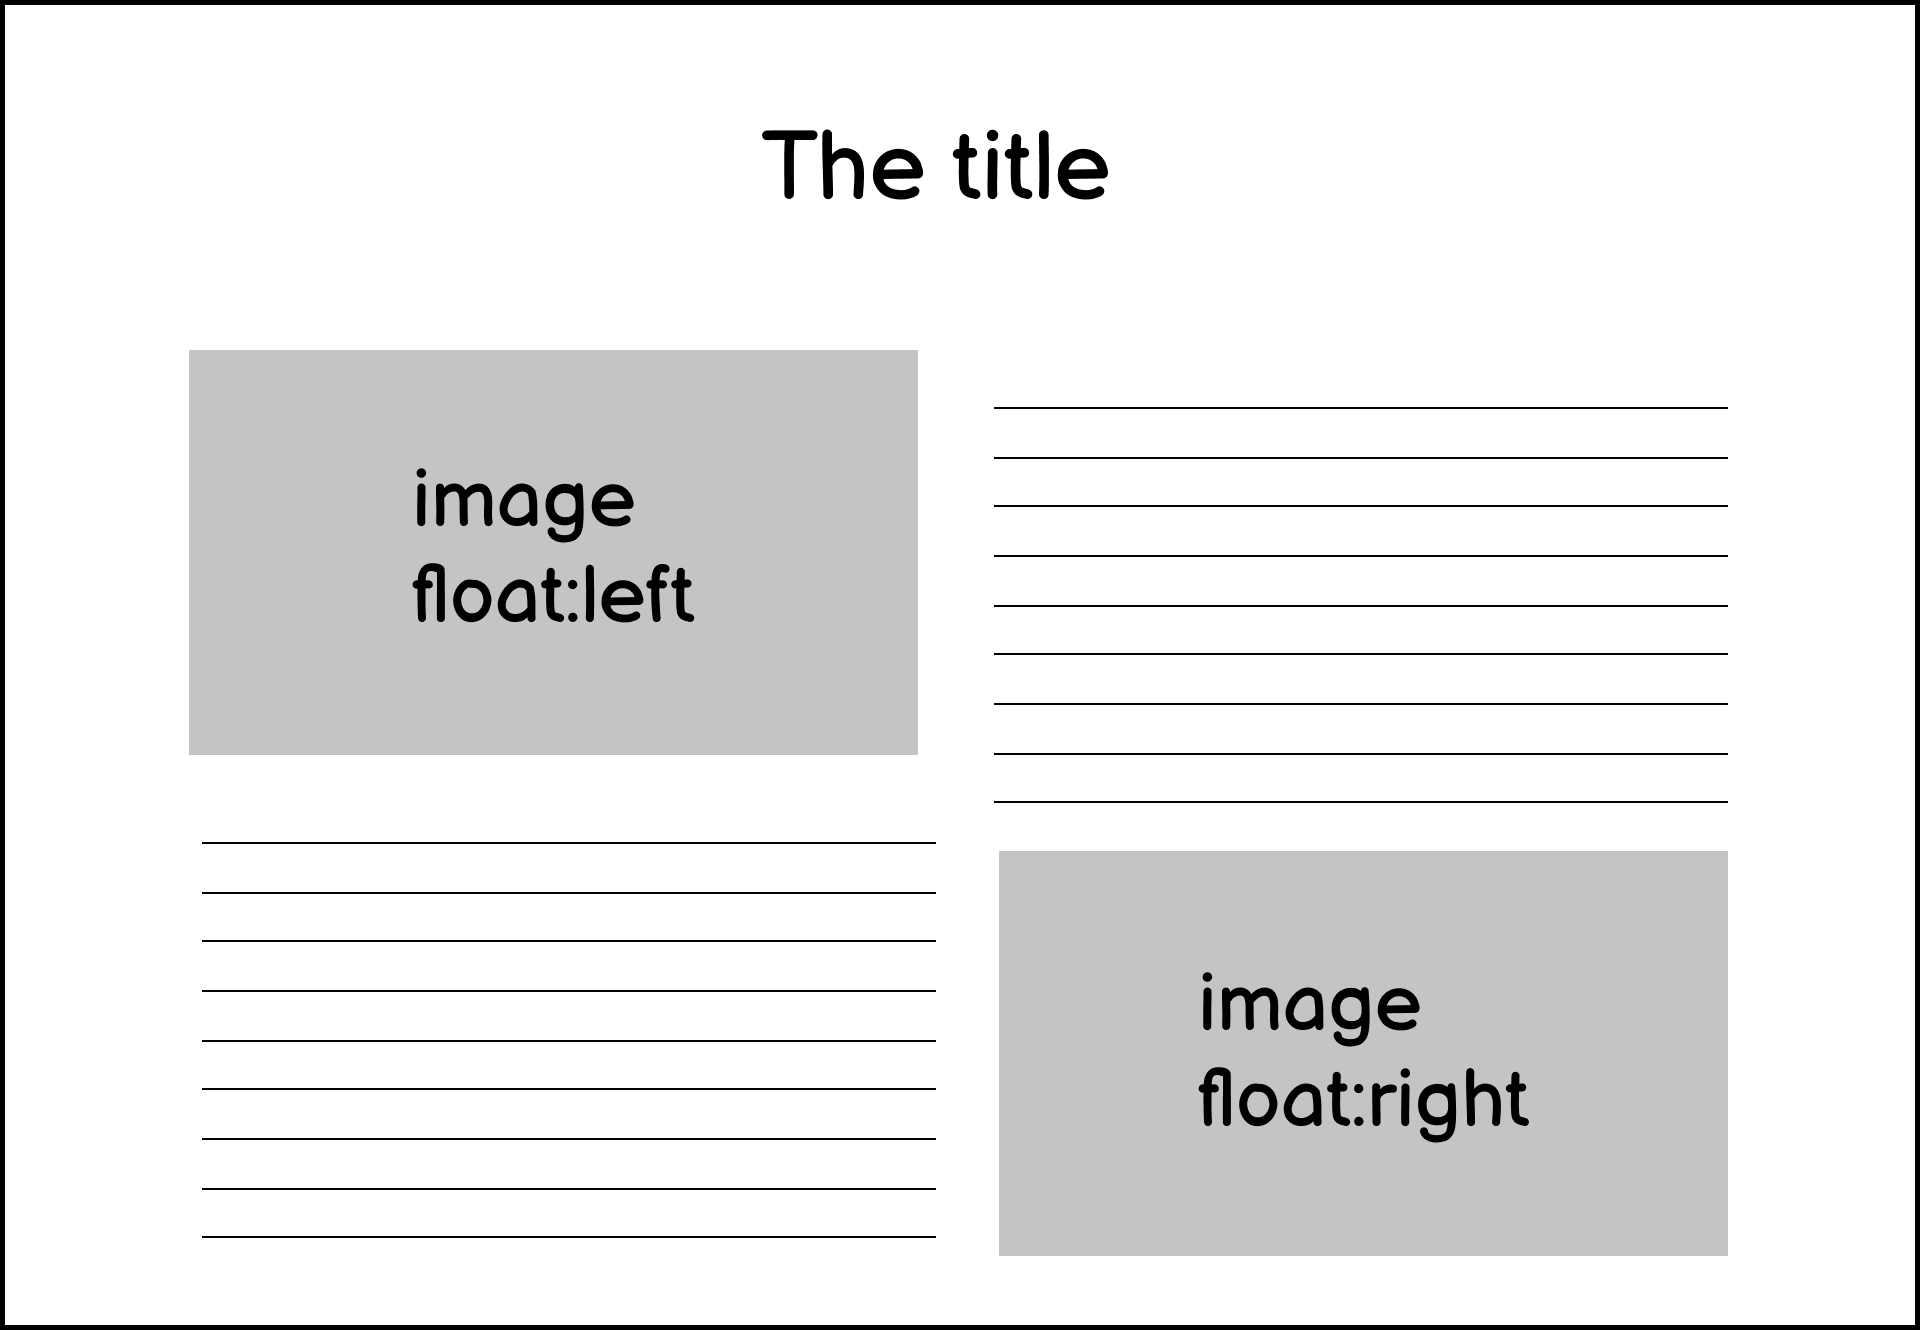 The most common use of float is to place images next to texts